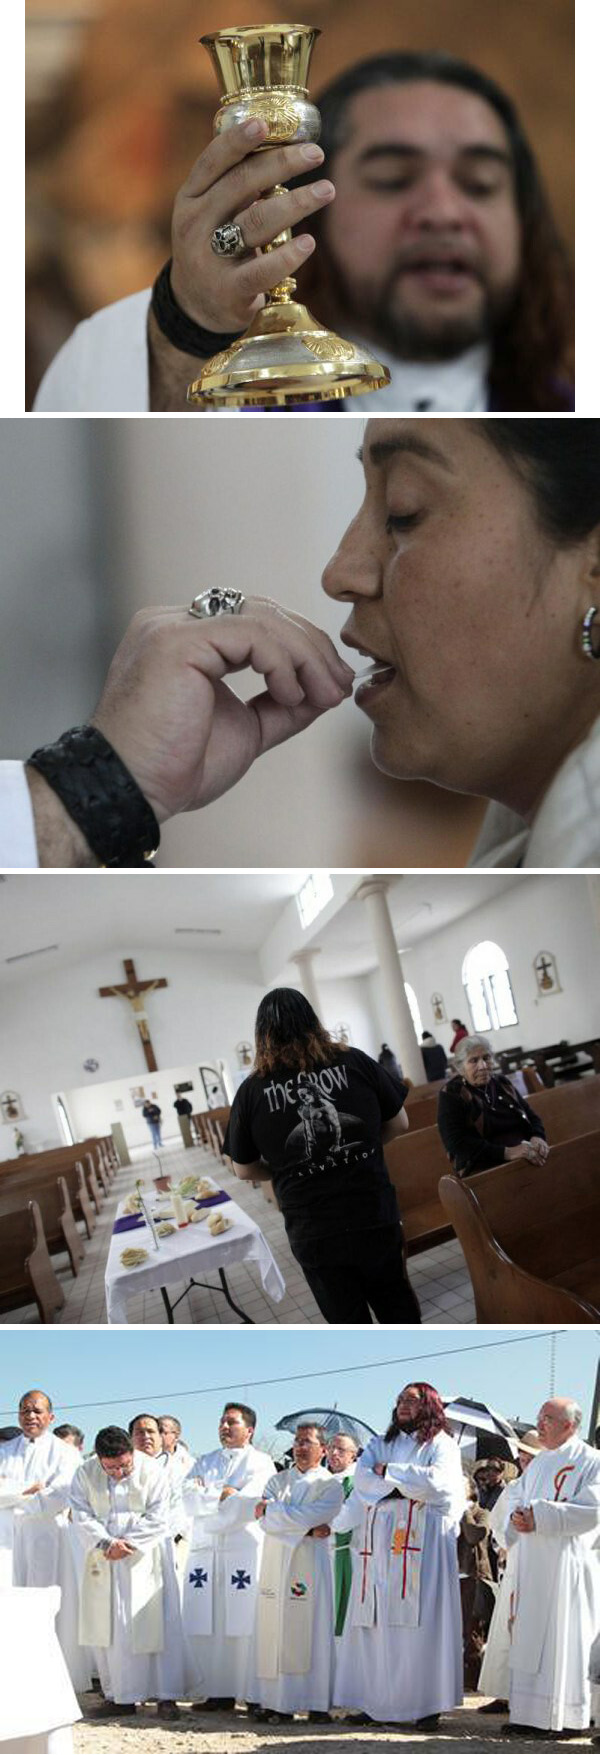 Pictures of Fr. Adolfo Huerta Aleman showing his satanic ring, t-shirts, and with the Bishop Raul vera Lopez